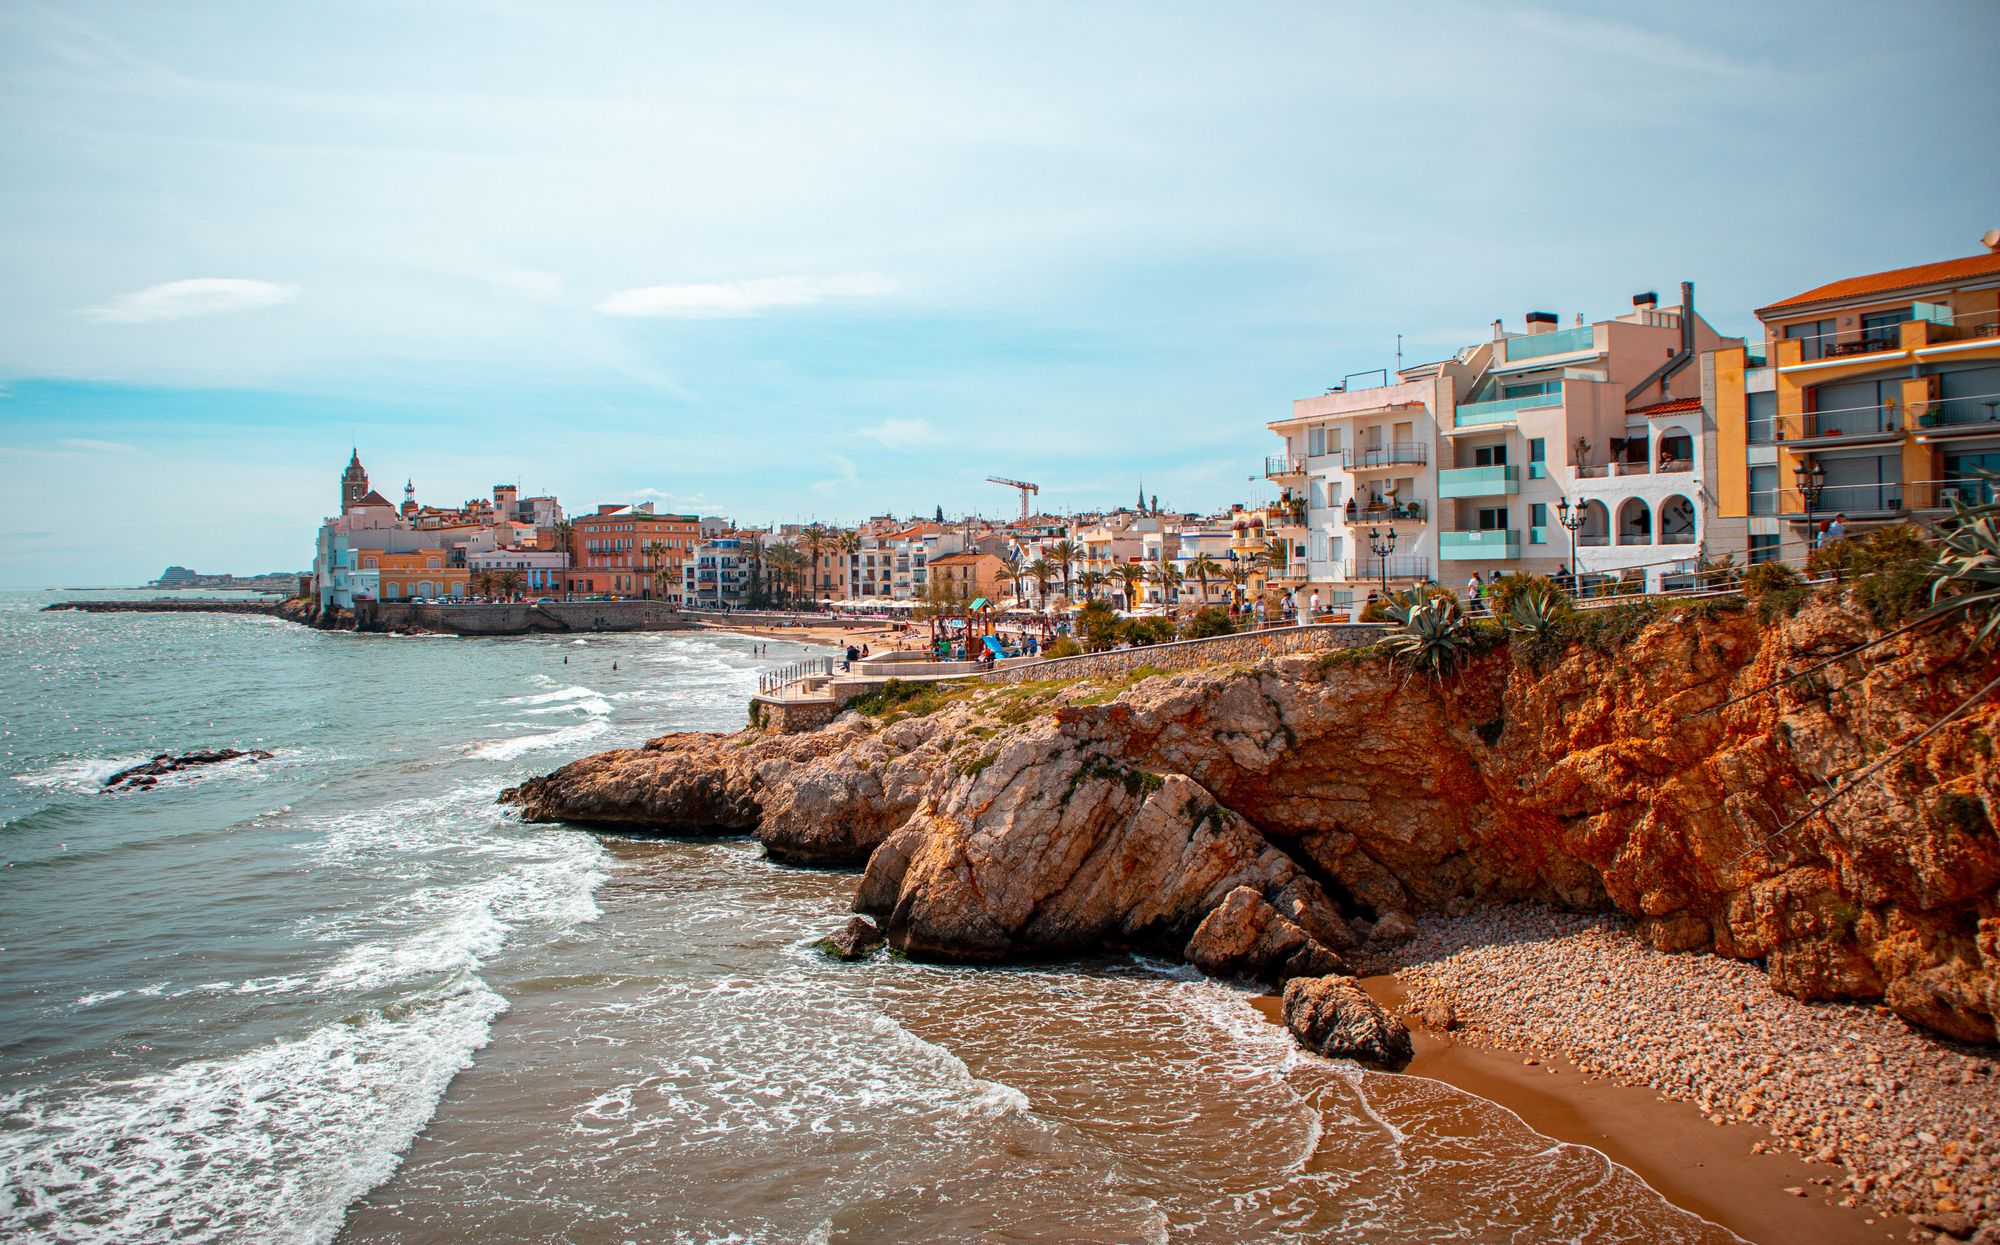 Beach town of Sitges in Catalonia.